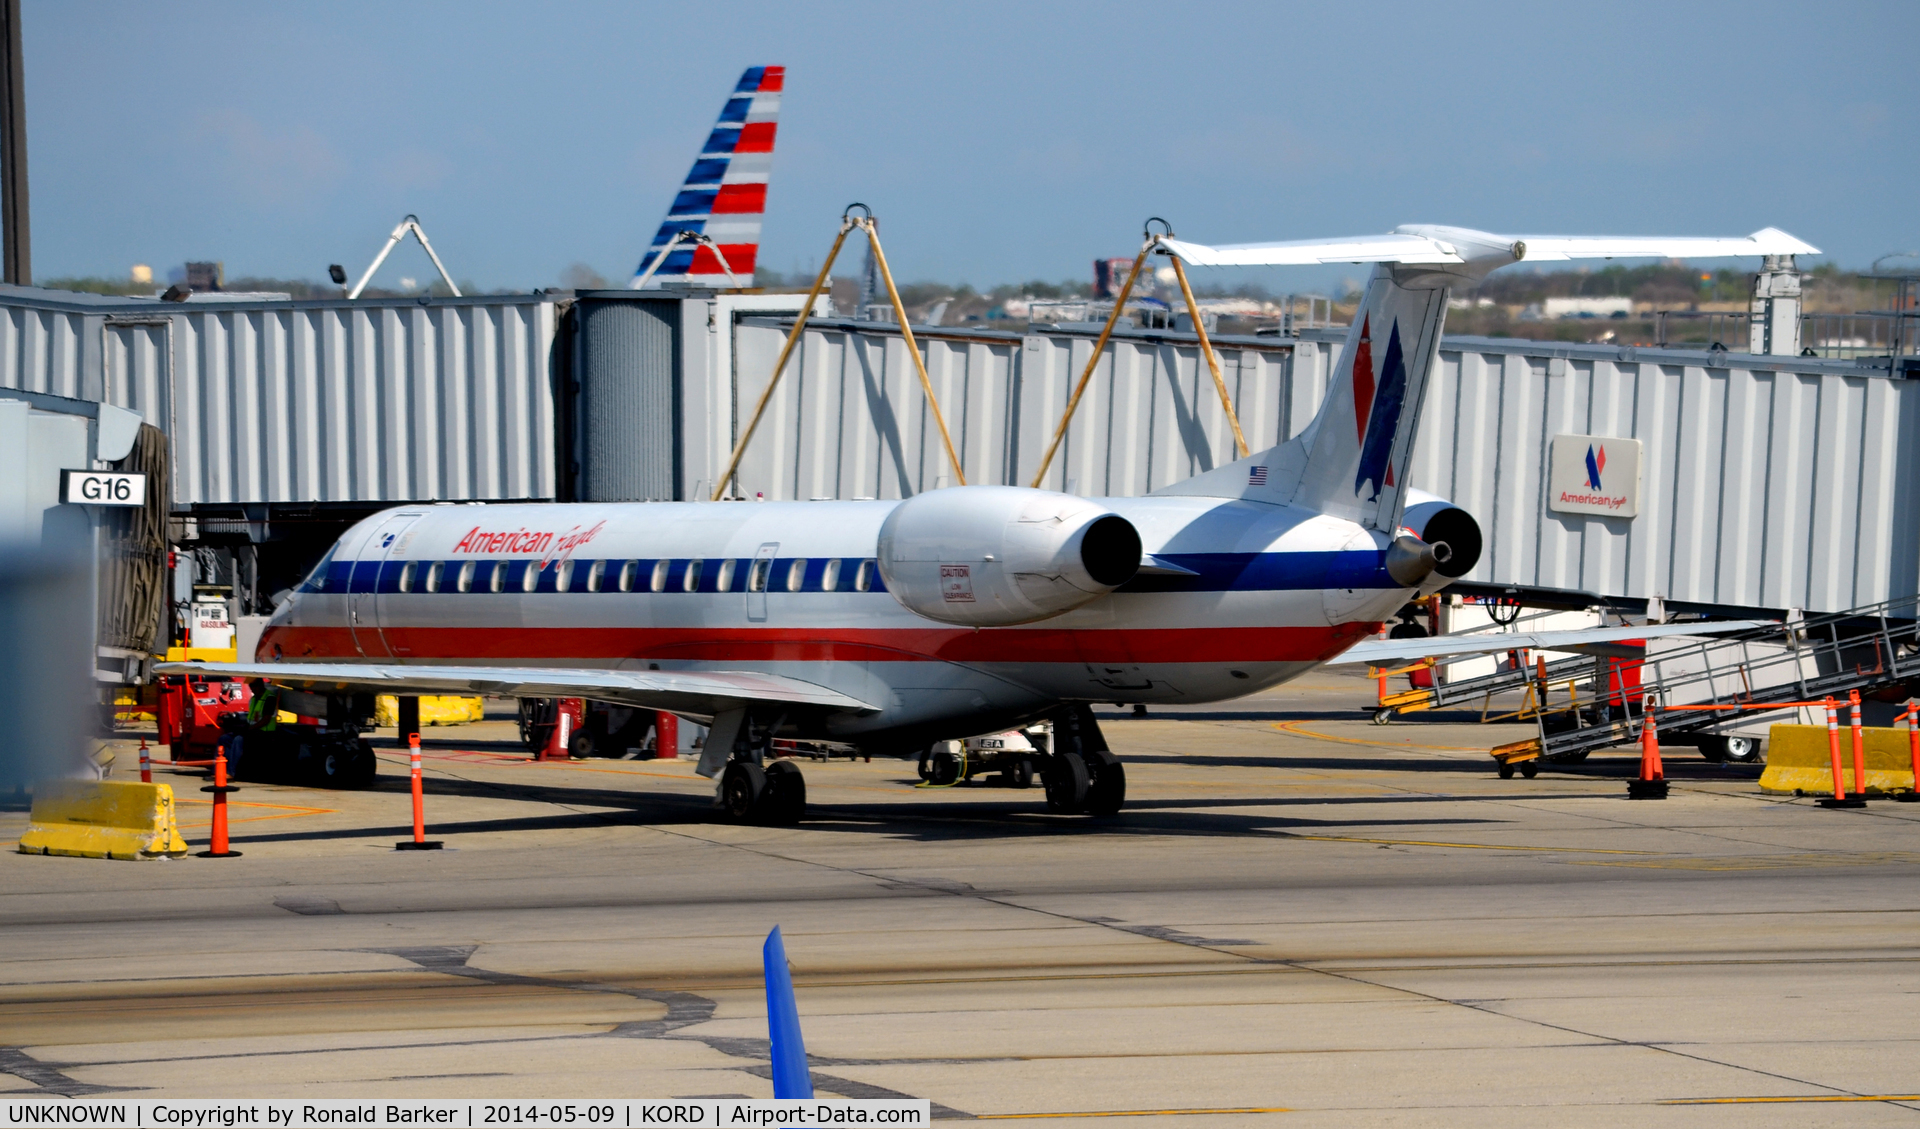 UNKNOWN, Airliners Various C/N Unknown, American Eagle EMB-145 at gate G16 O'Hare